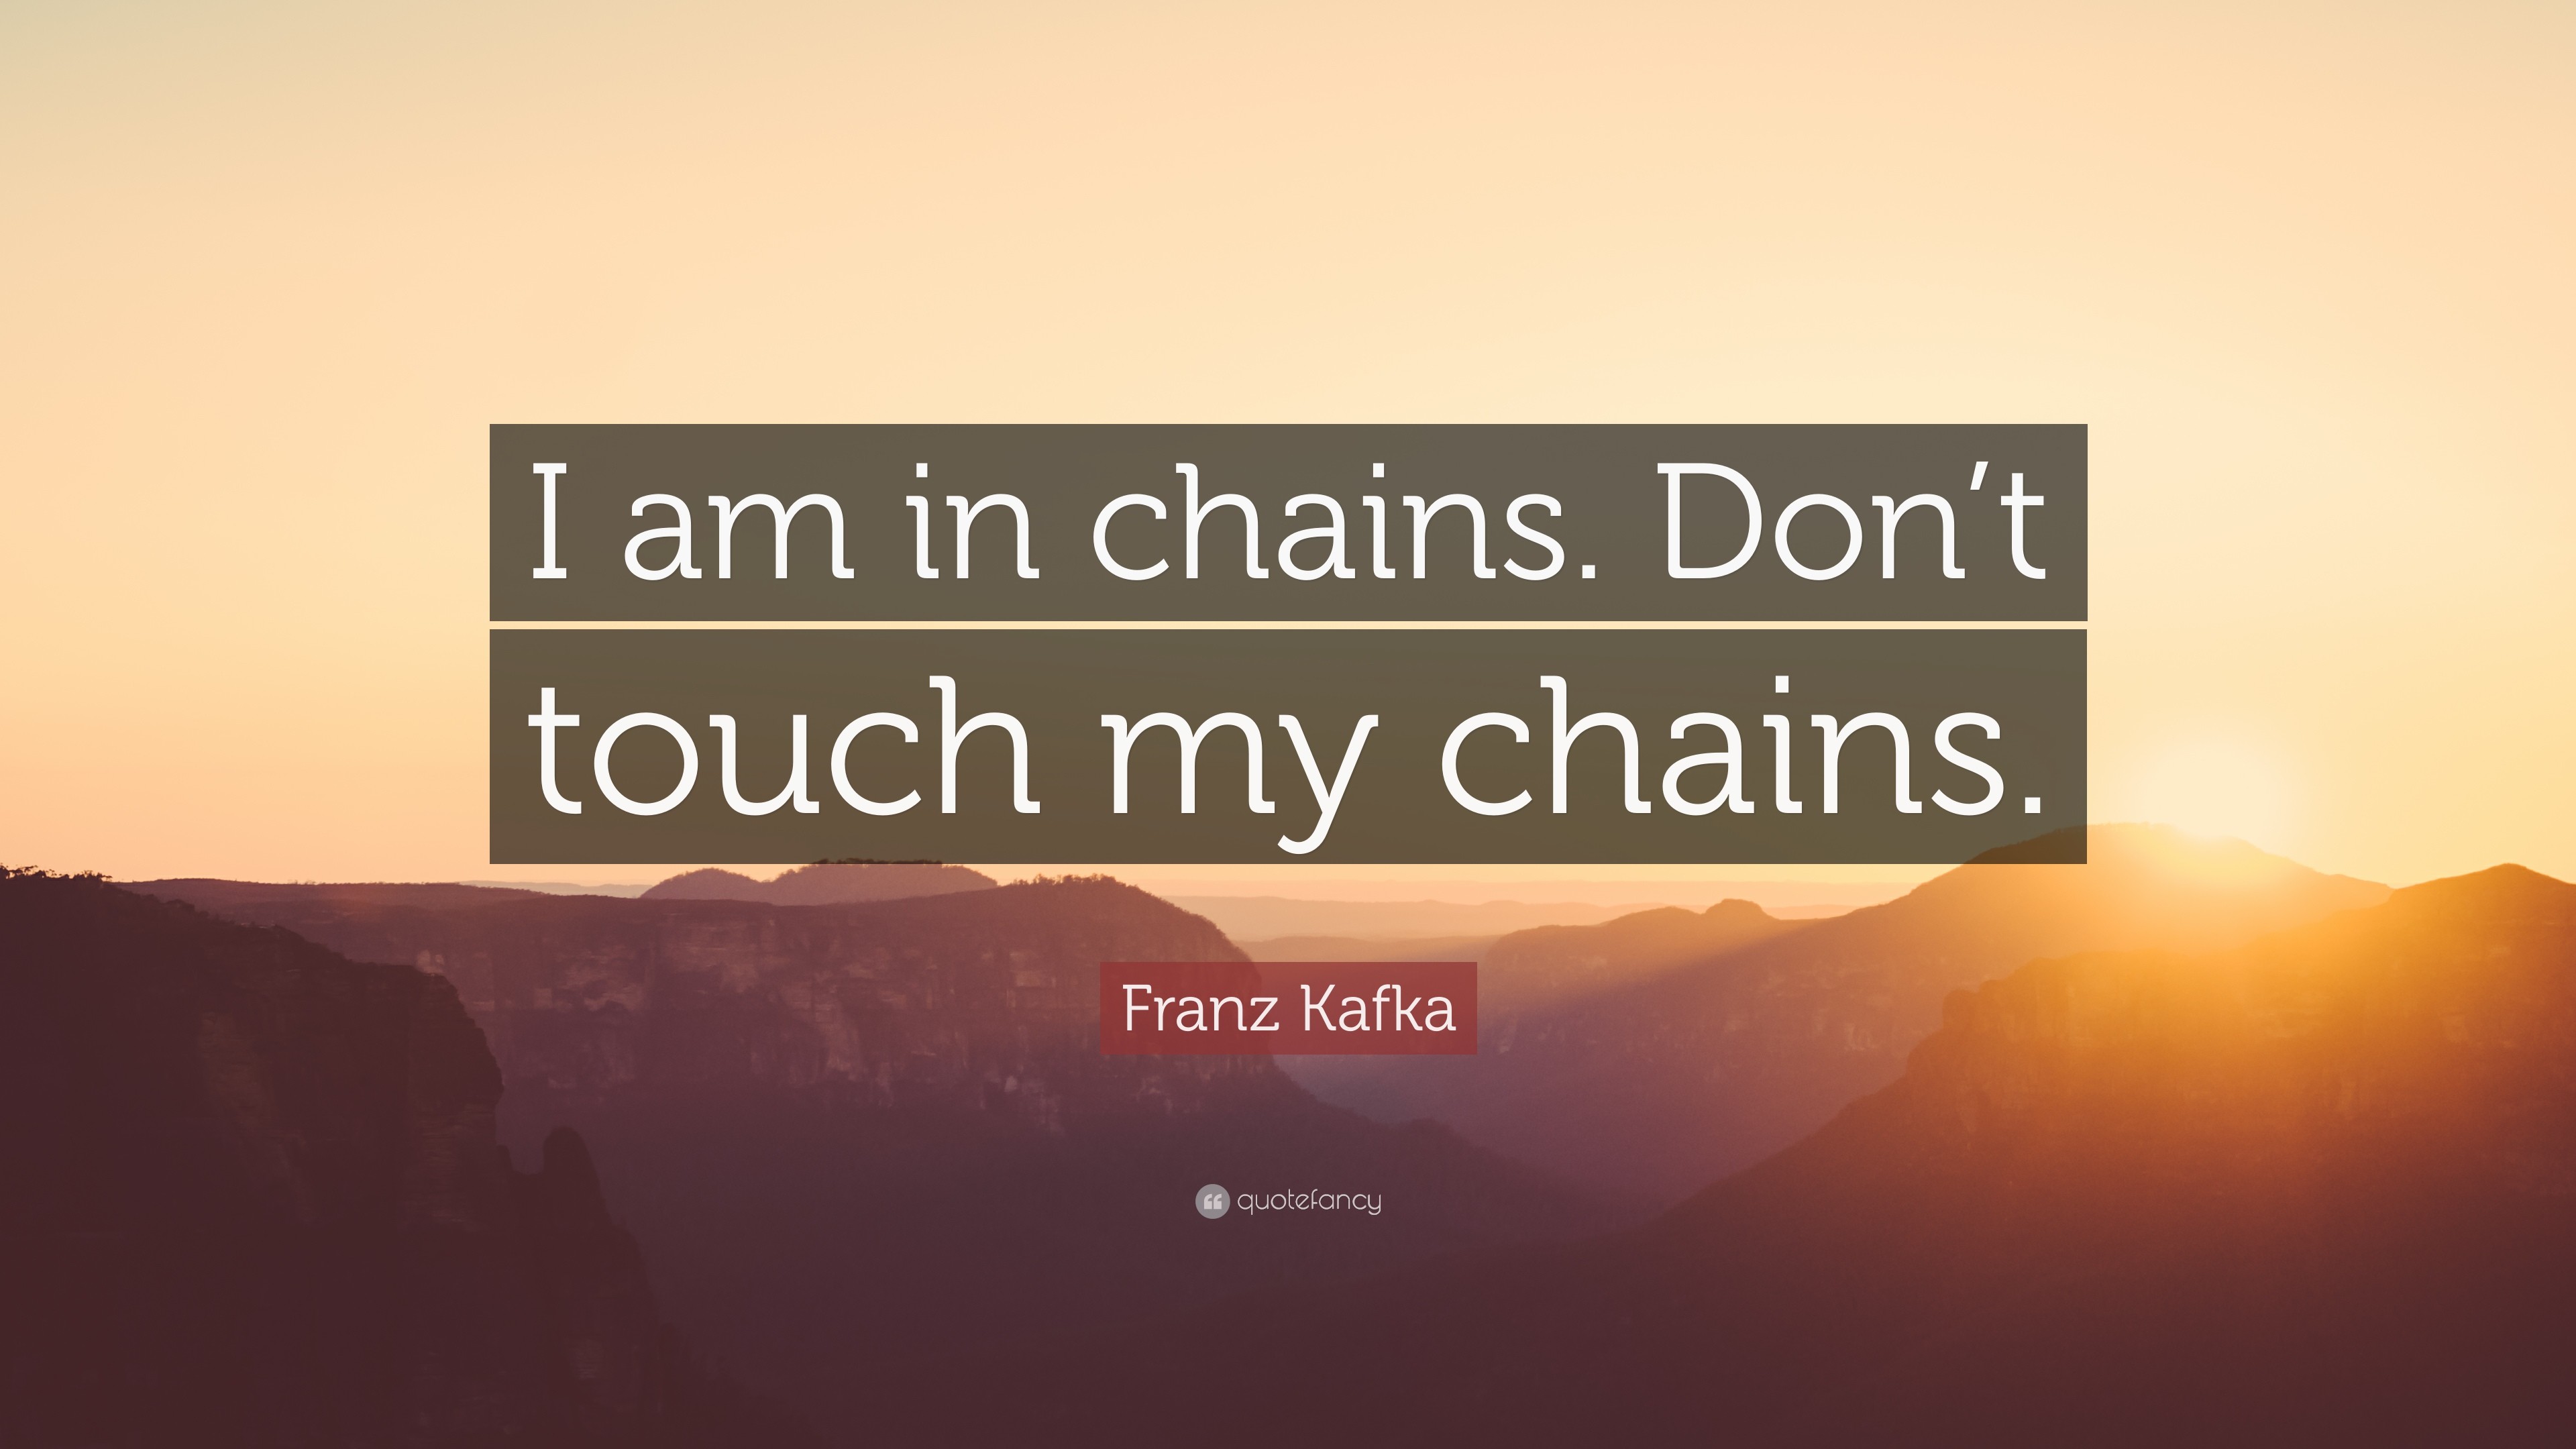 Franz Kafka Quote I am in chains. Dont touch my chains